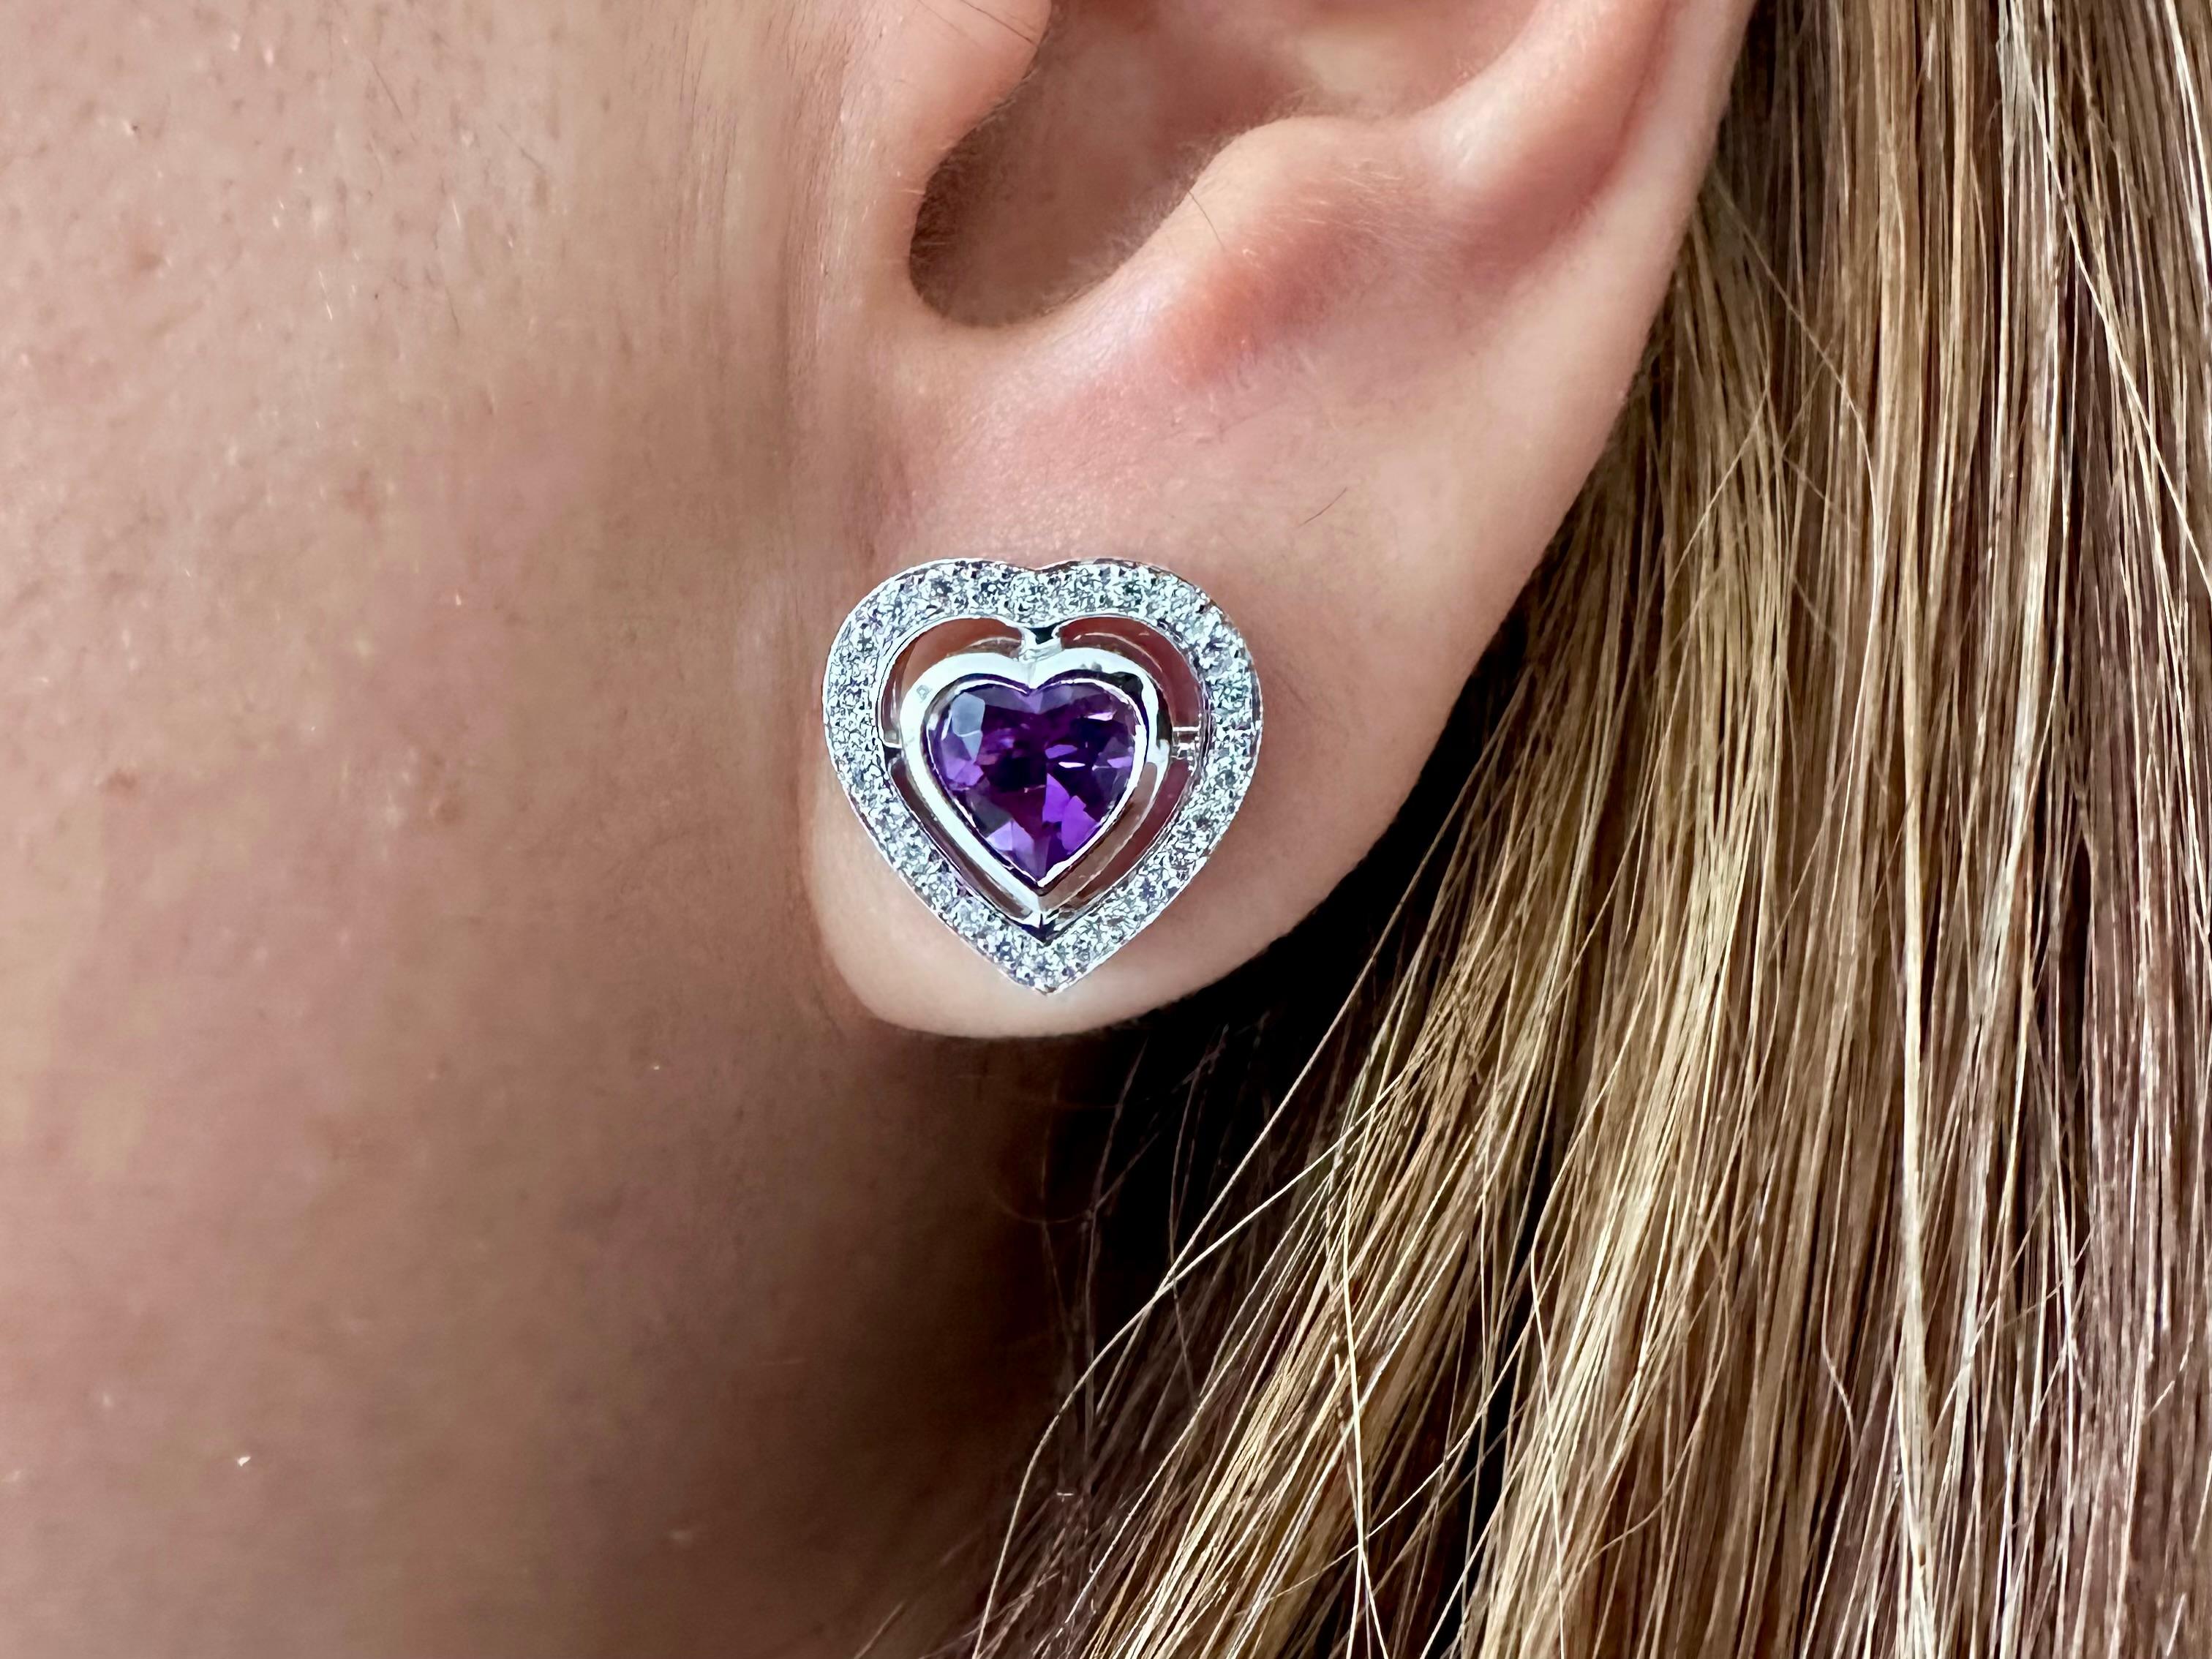 Theo Fennell Earrings
Two heart-shaped Russian Amethyst Est 1.25cts Each
2.50 cts total Amethyst and 52 Round Diamonds .50 cts Total  Surrounded by Numerous Round Brilliant Cut Diamond Pave set in 18k White Gold
Stud Earrings with Friction